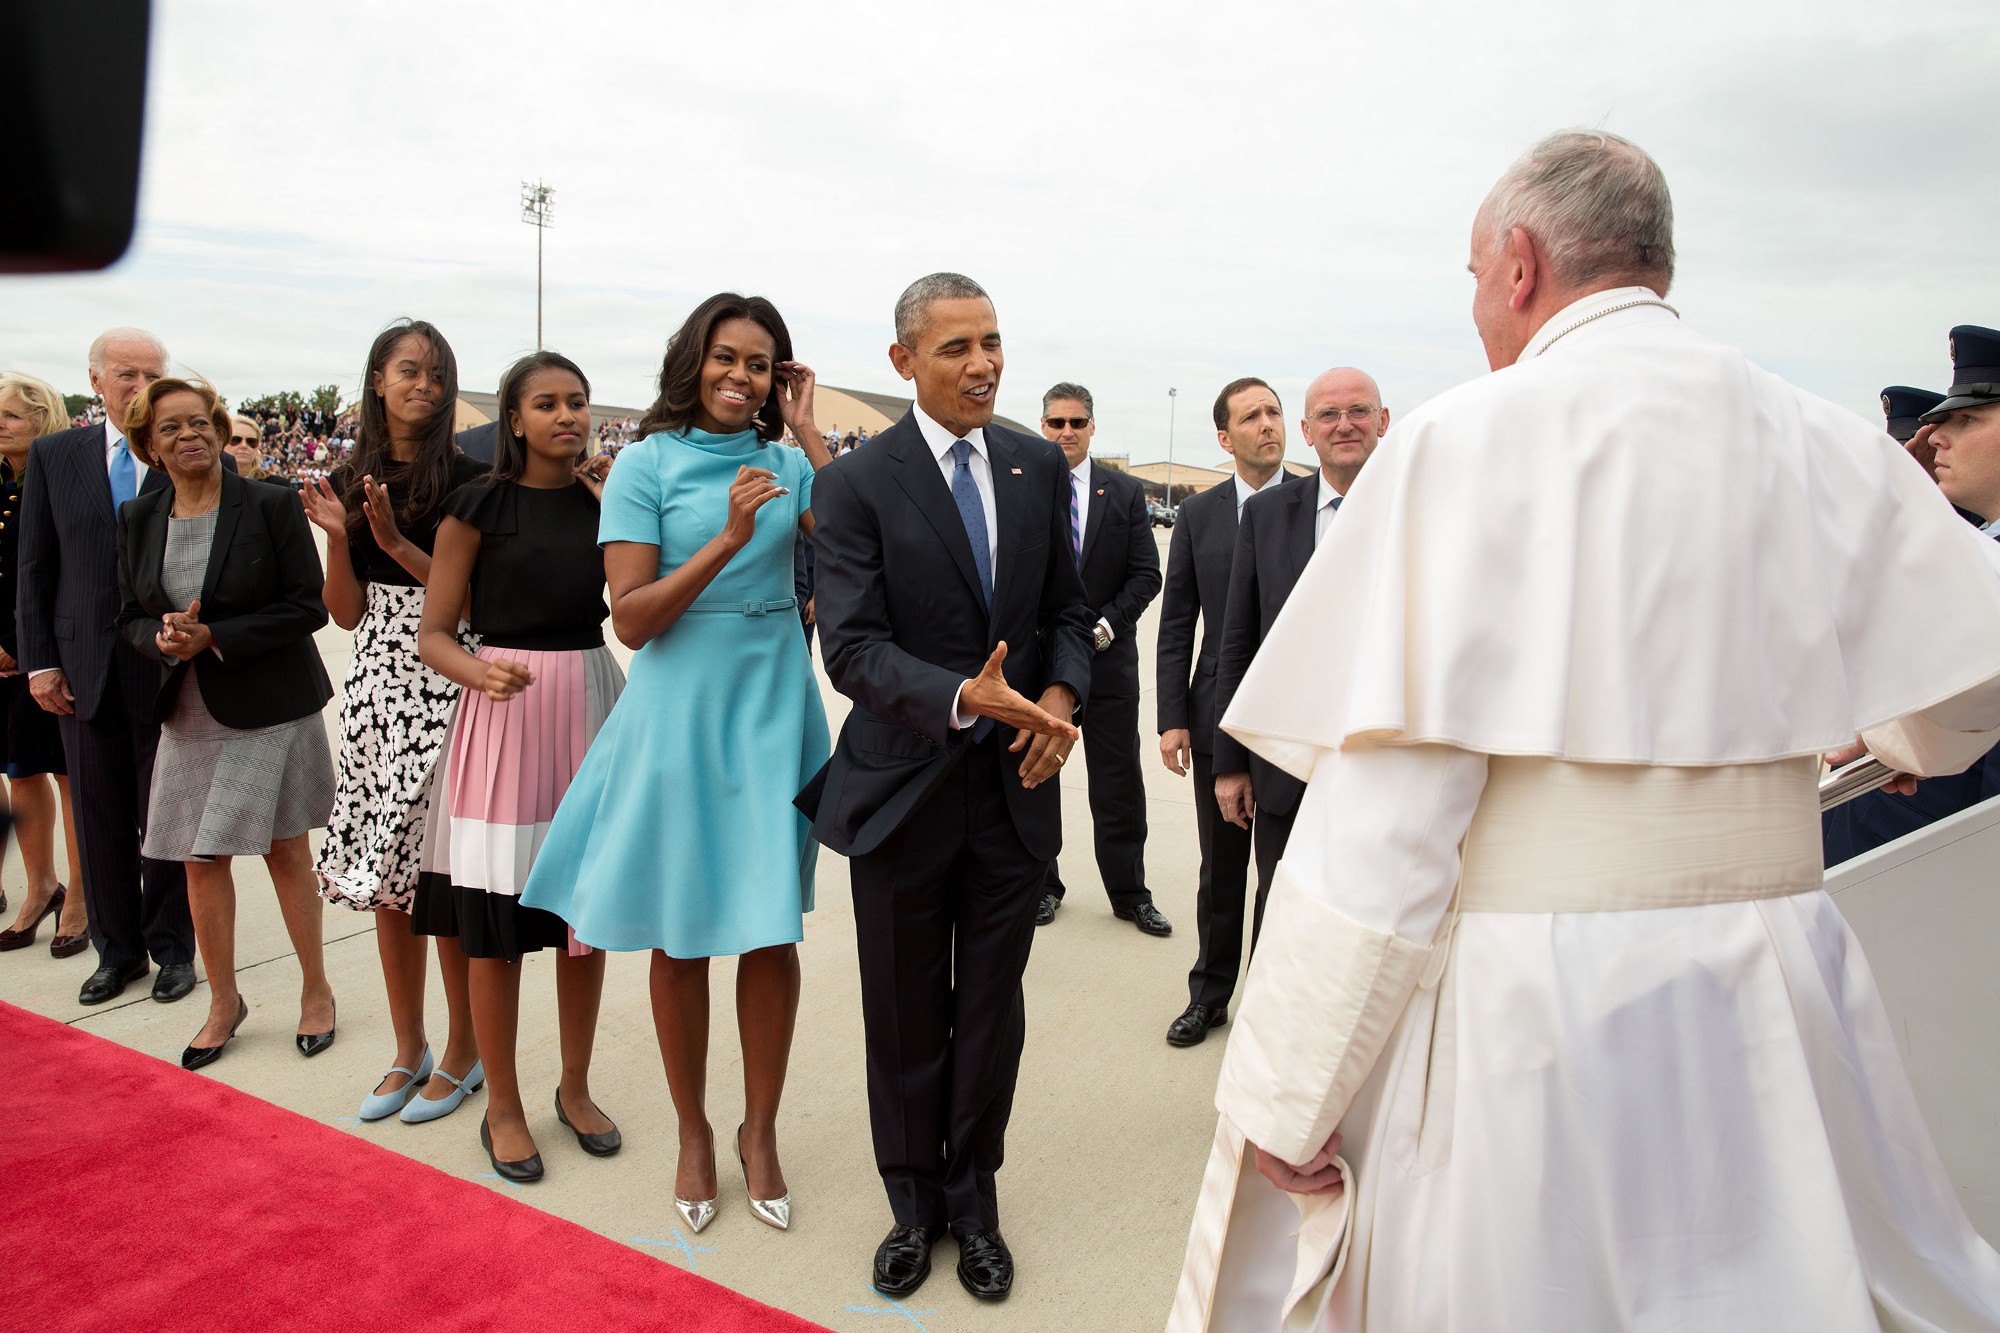 President Obama and the First Family greet Pope Francis as he steps off Shephard One. (Official White House Photo by Pete Souza)